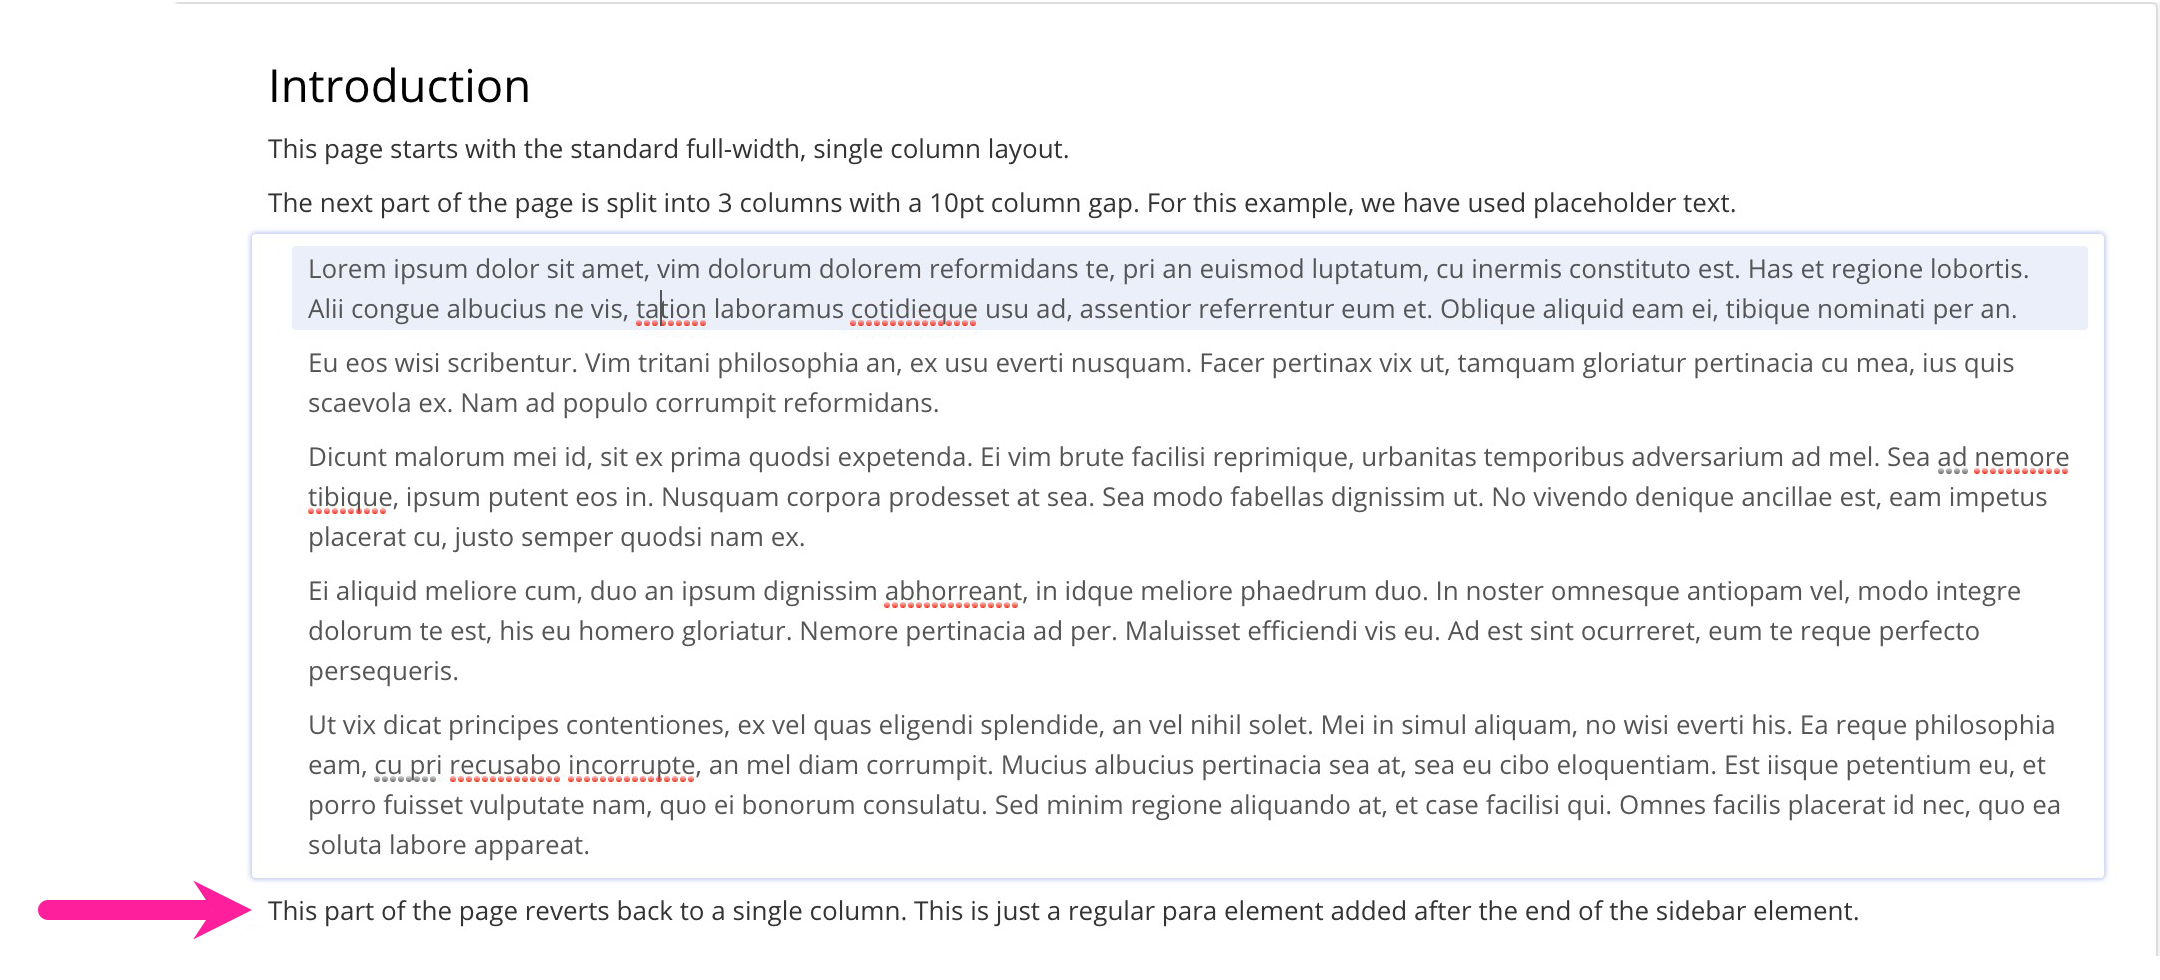 A topic with a title, some text, and a sidebar containing text. After the sidebar, there is another paragraph of text. A callout arrow points to the paragraph after the sidebar.